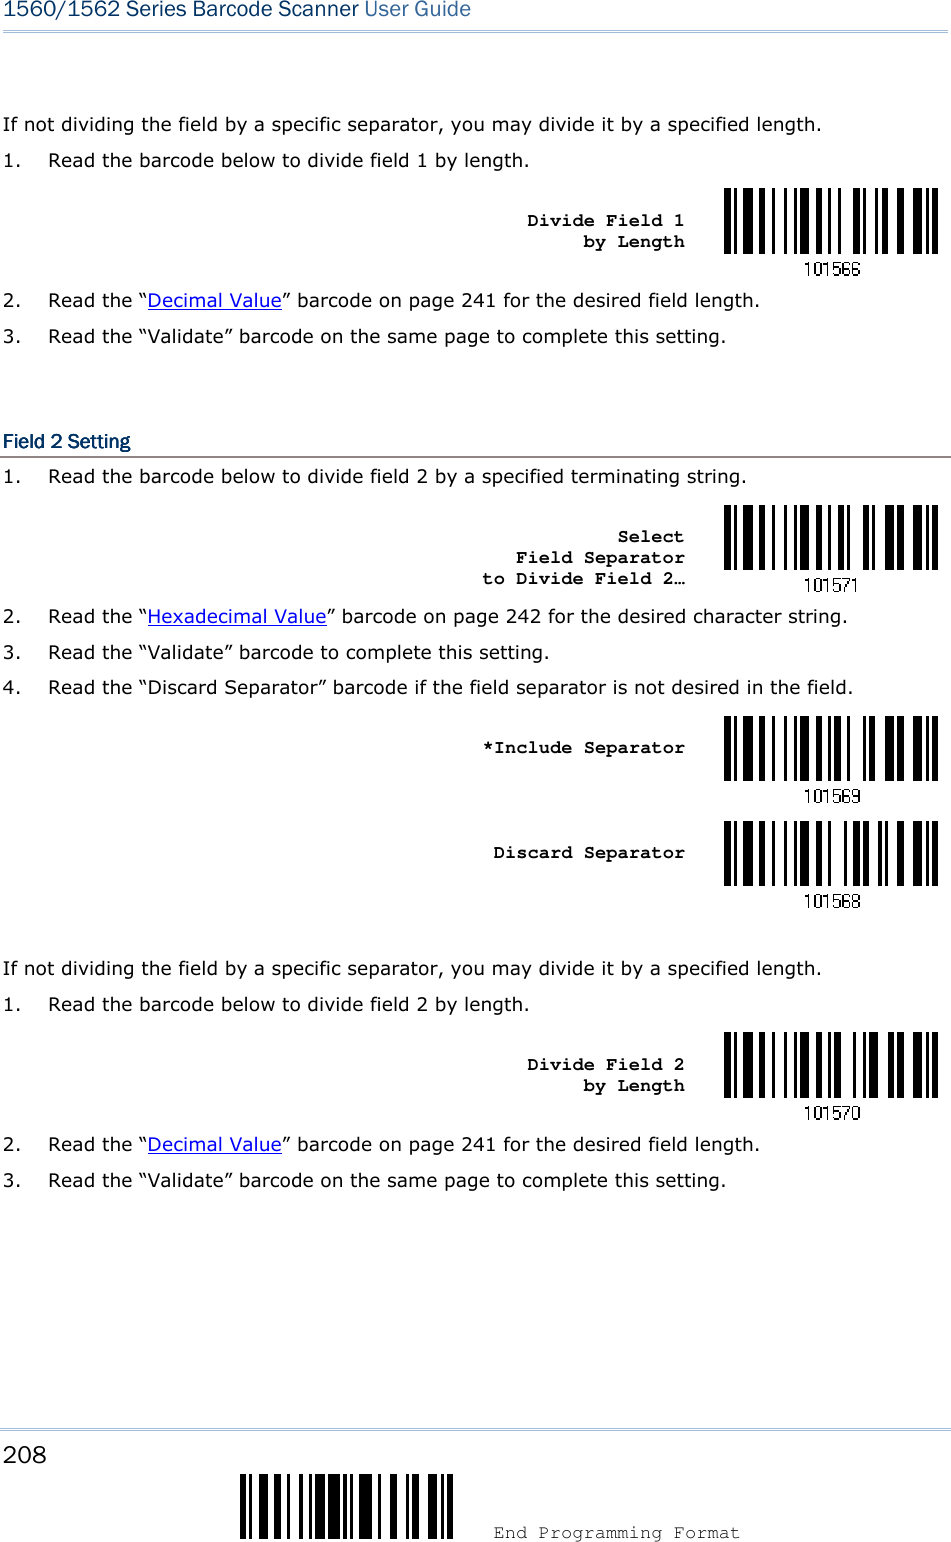 208  End Programming Format 1560/1562 Series Barcode Scanner User Guide   If not dividing the field by a specific separator, you may divide it by a specified length. 1. Read the barcode below to divide field 1 by length.    Divide Field 1      by Length  2. Read the “Decimal Value” barcode on page 241 for the desired field length. 3. Read the “Validate” barcode on the same page to complete this setting.   Field 2Field 2Field 2Field 2    SettingSettingSettingSetting    1. Read the barcode below to divide field 2 by a specified terminating string.    Select          Field Separator    to Divide Field 2…  2. Read the “Hexadecimal Value” barcode on page 242 for the desired character string. 3. Read the “Validate” barcode to complete this setting. 4. Read the “Discard Separator” barcode if the field separator is not desired in the field.    *Include Separator     Discard Separator   If not dividing the field by a specific separator, you may divide it by a specified length. 1. Read the barcode below to divide field 2 by length.    Divide Field 2      by Length  2. Read the “Decimal Value” barcode on page 241 for the desired field length. 3. Read the “Validate” barcode on the same page to complete this setting.     